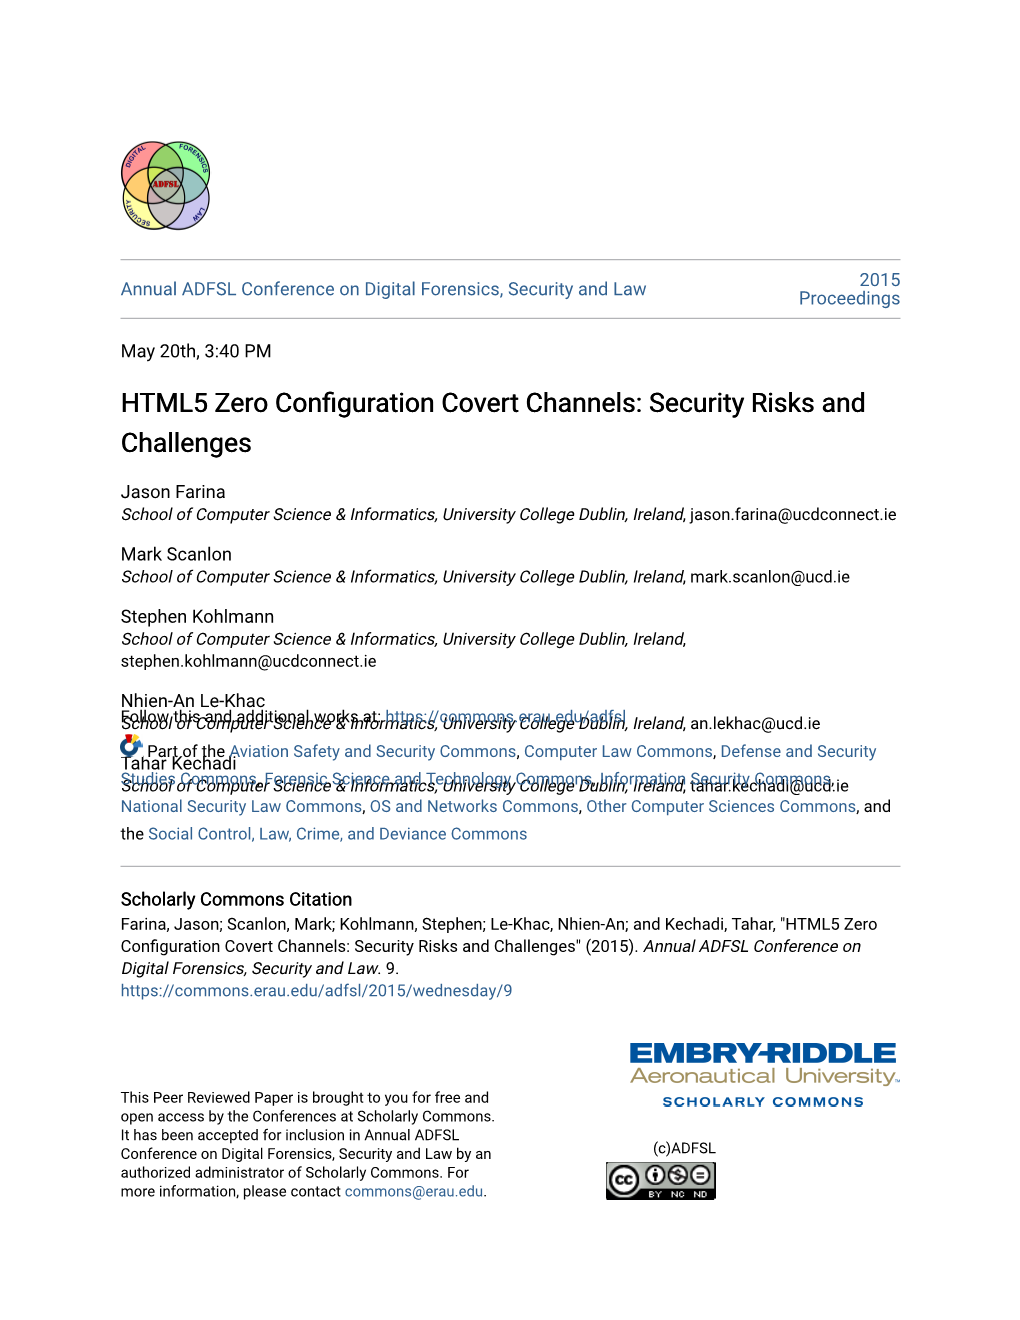 HTML5 Zero Configuration Covert Channels: Security Risks and Challenges